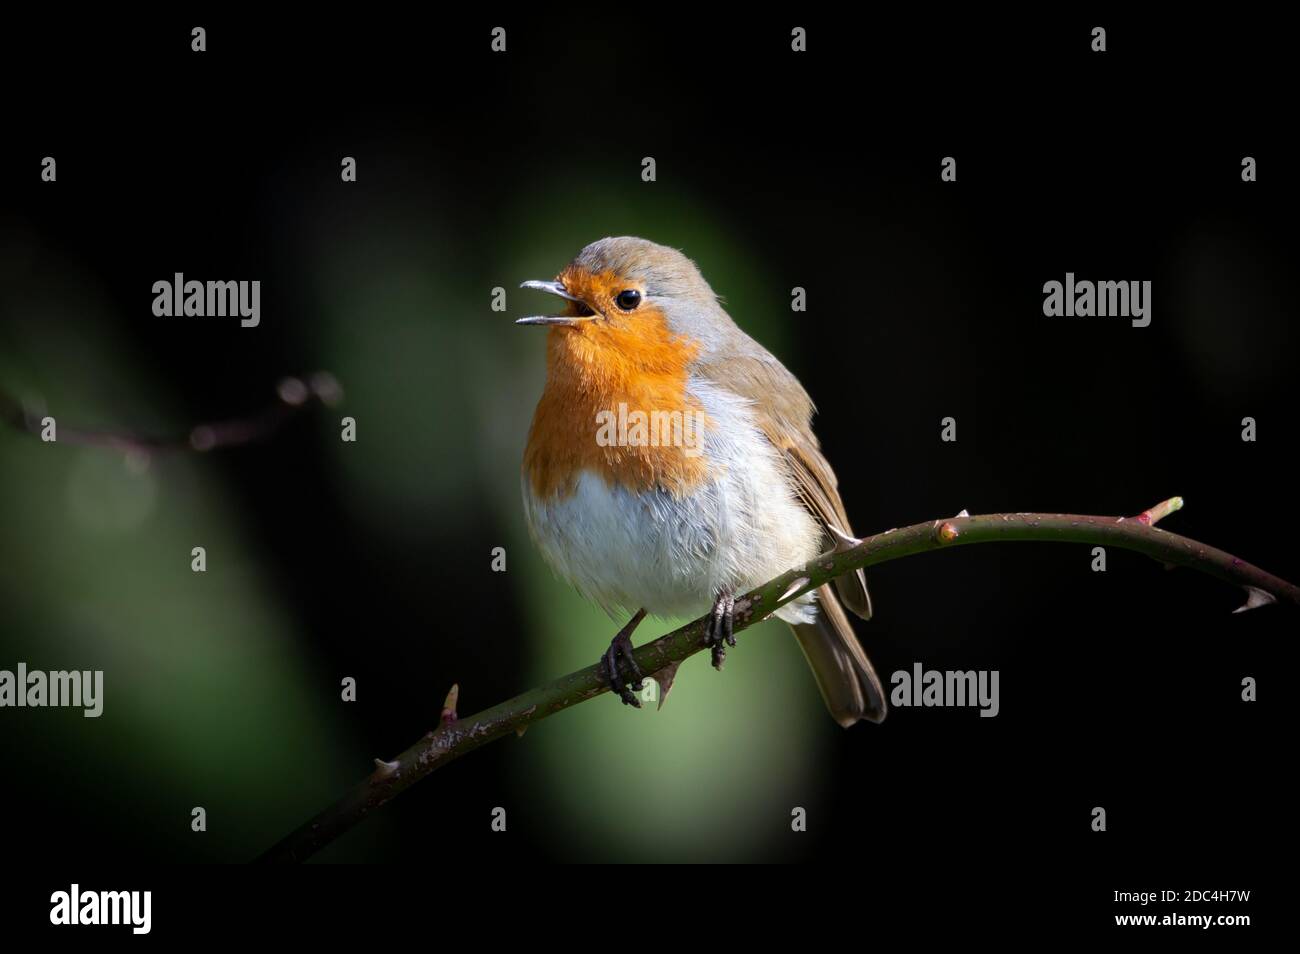 Robin on a thorny branch singing Stock Photo